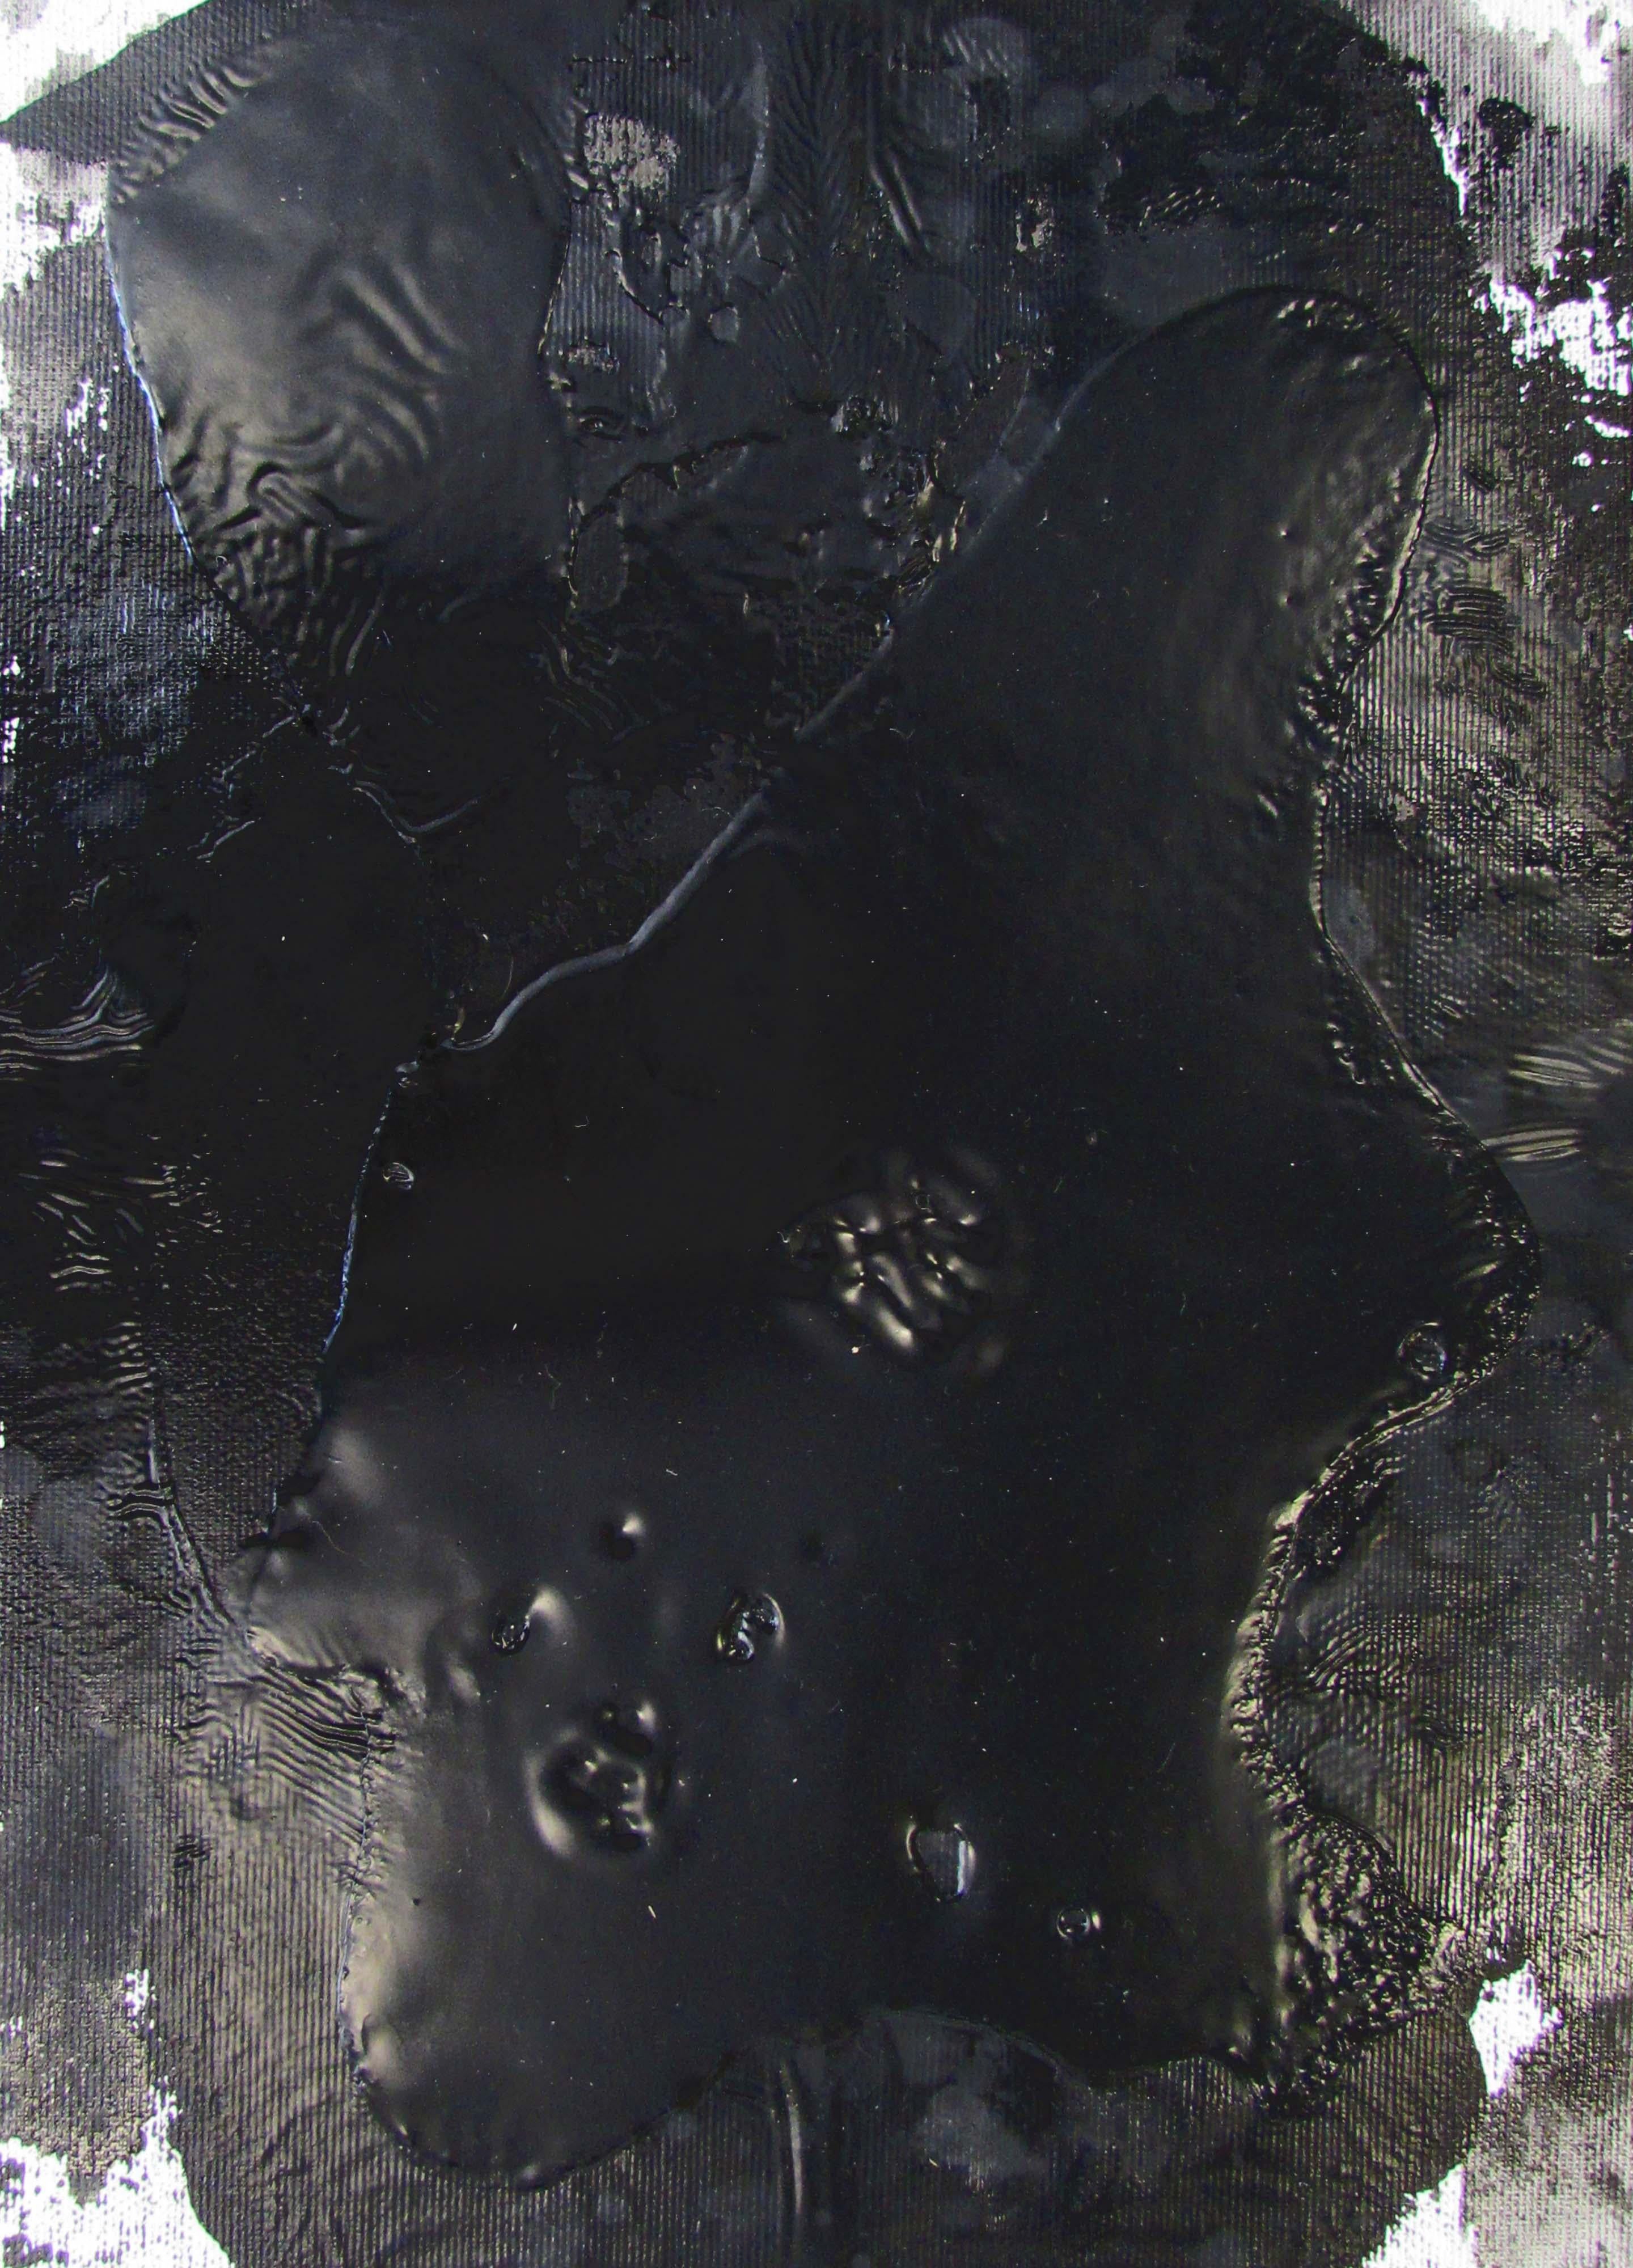 Zsolt Berszán Abstract Painting - Untitled 01 [Dissecting the Unknown 01] - Black, Monochrome, Abstract, 21st C